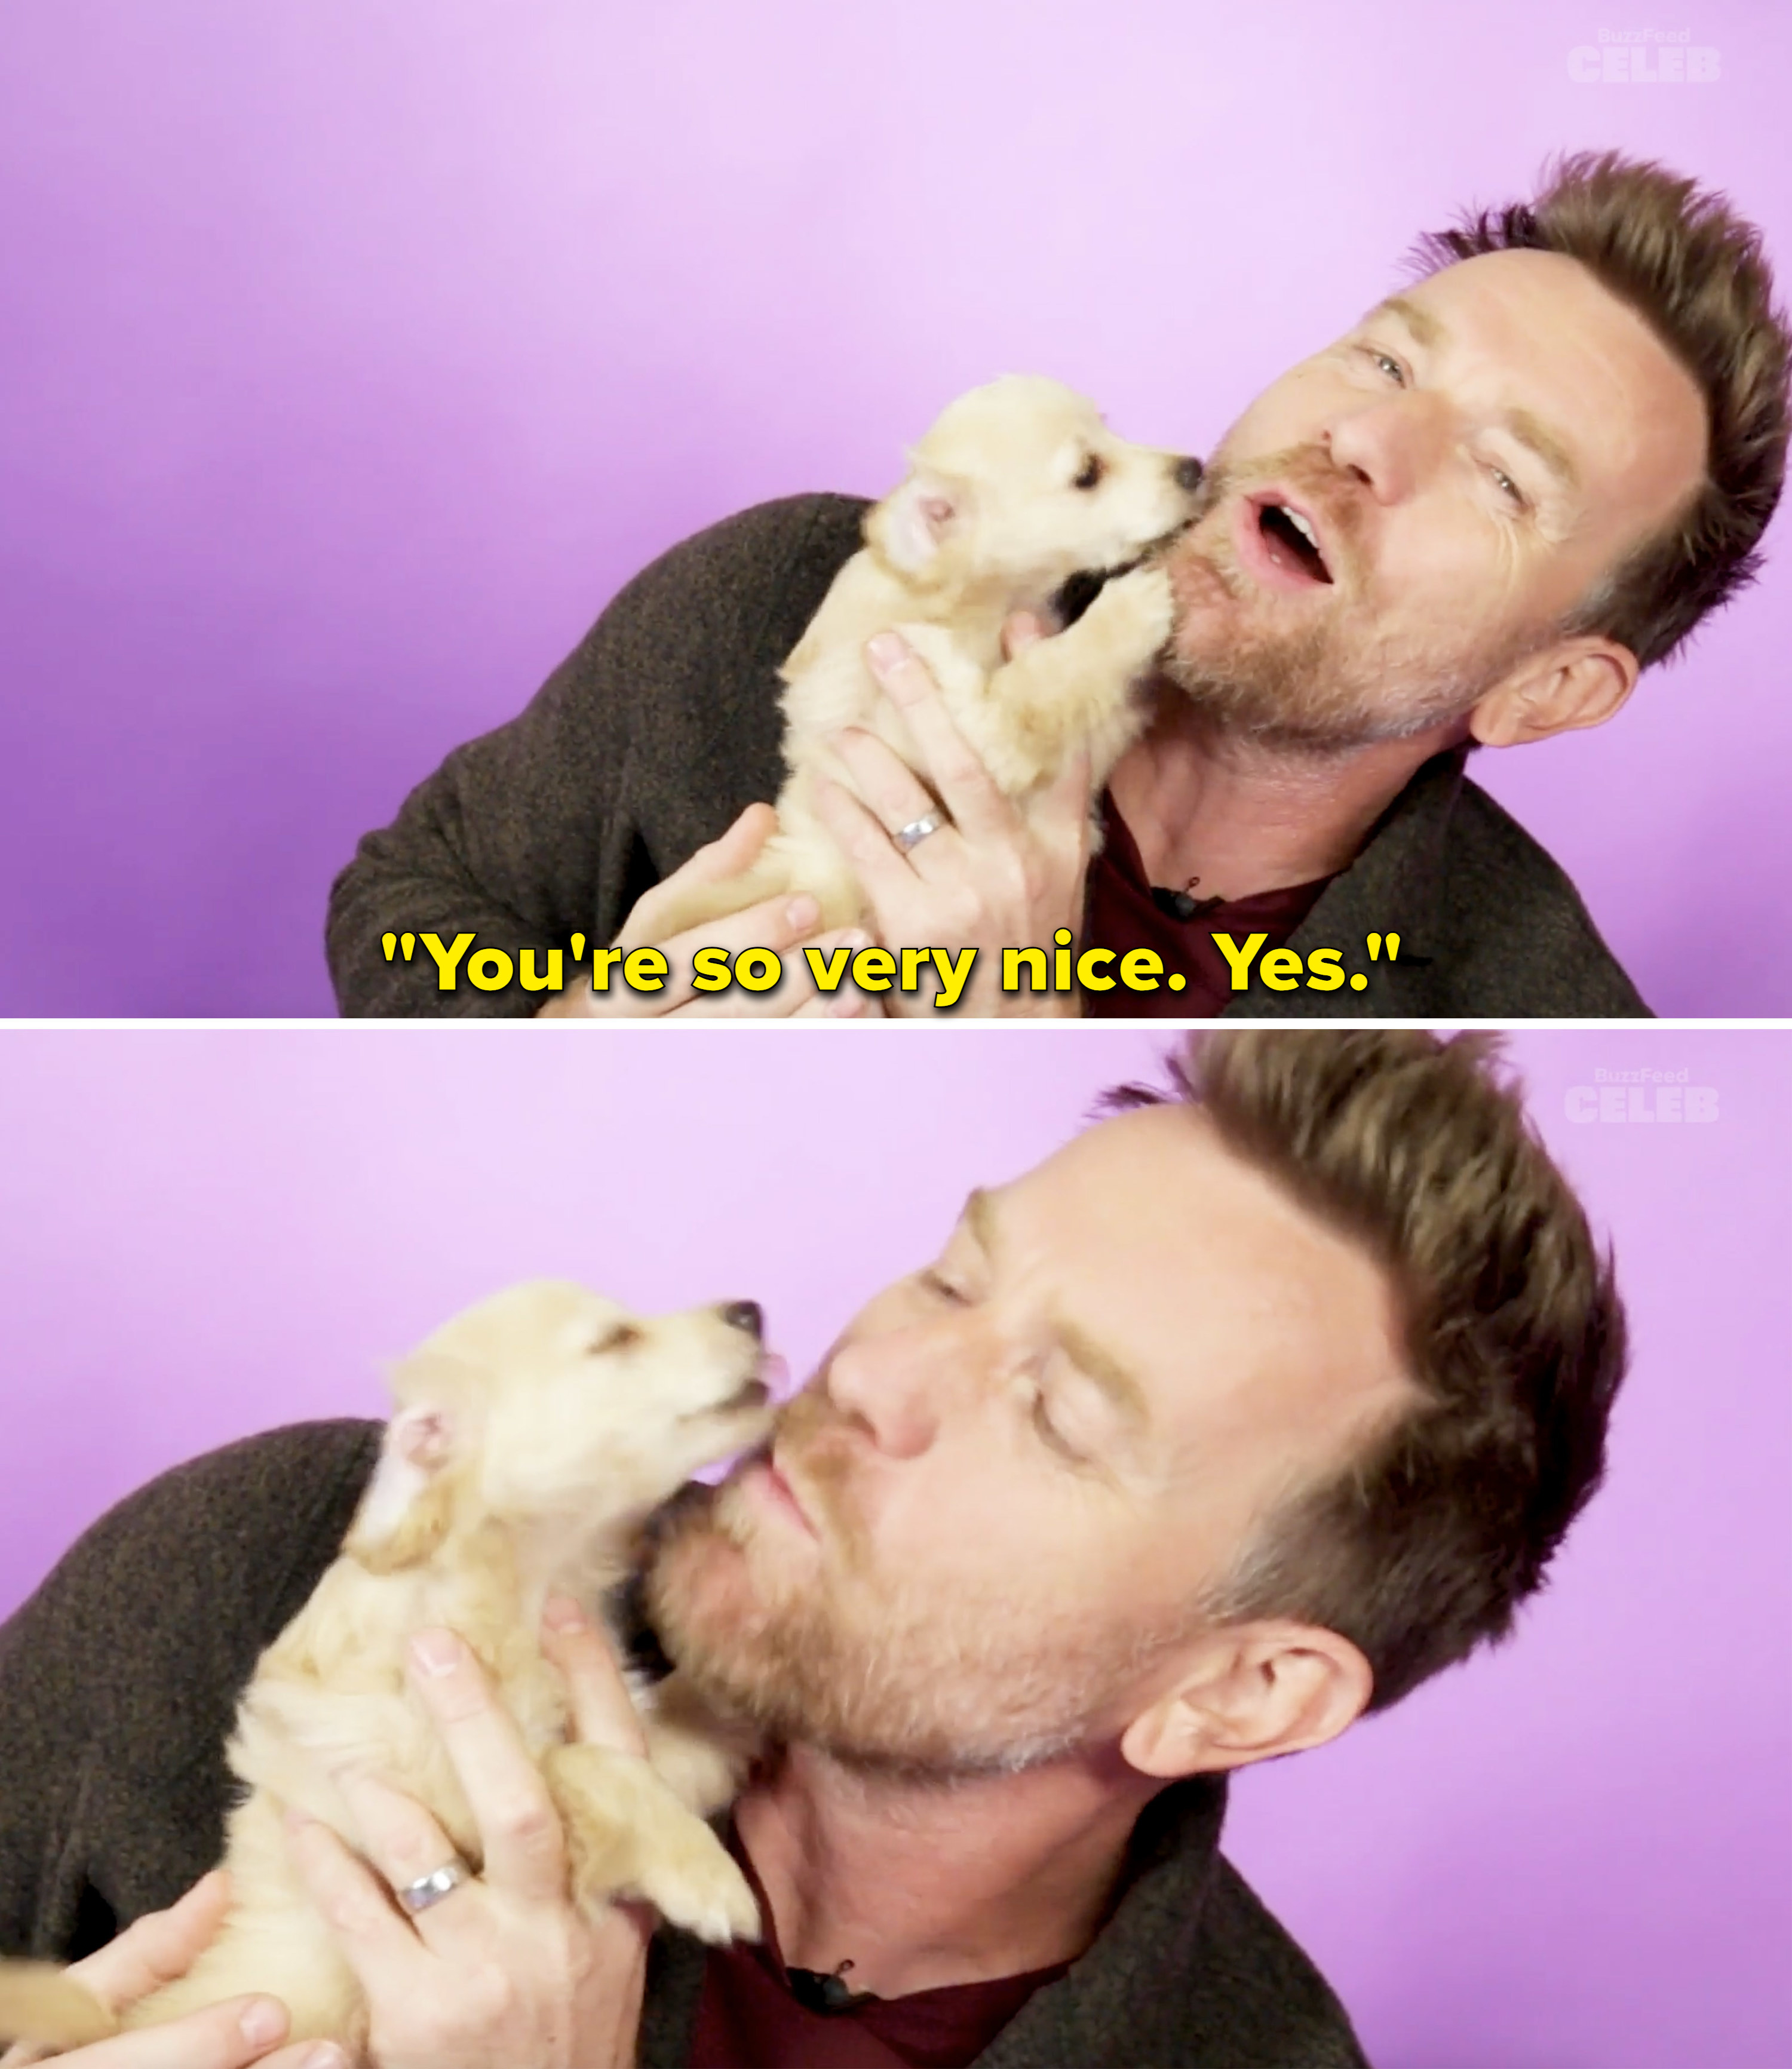 Ewan calling a puppy very nice while it licks him on the face